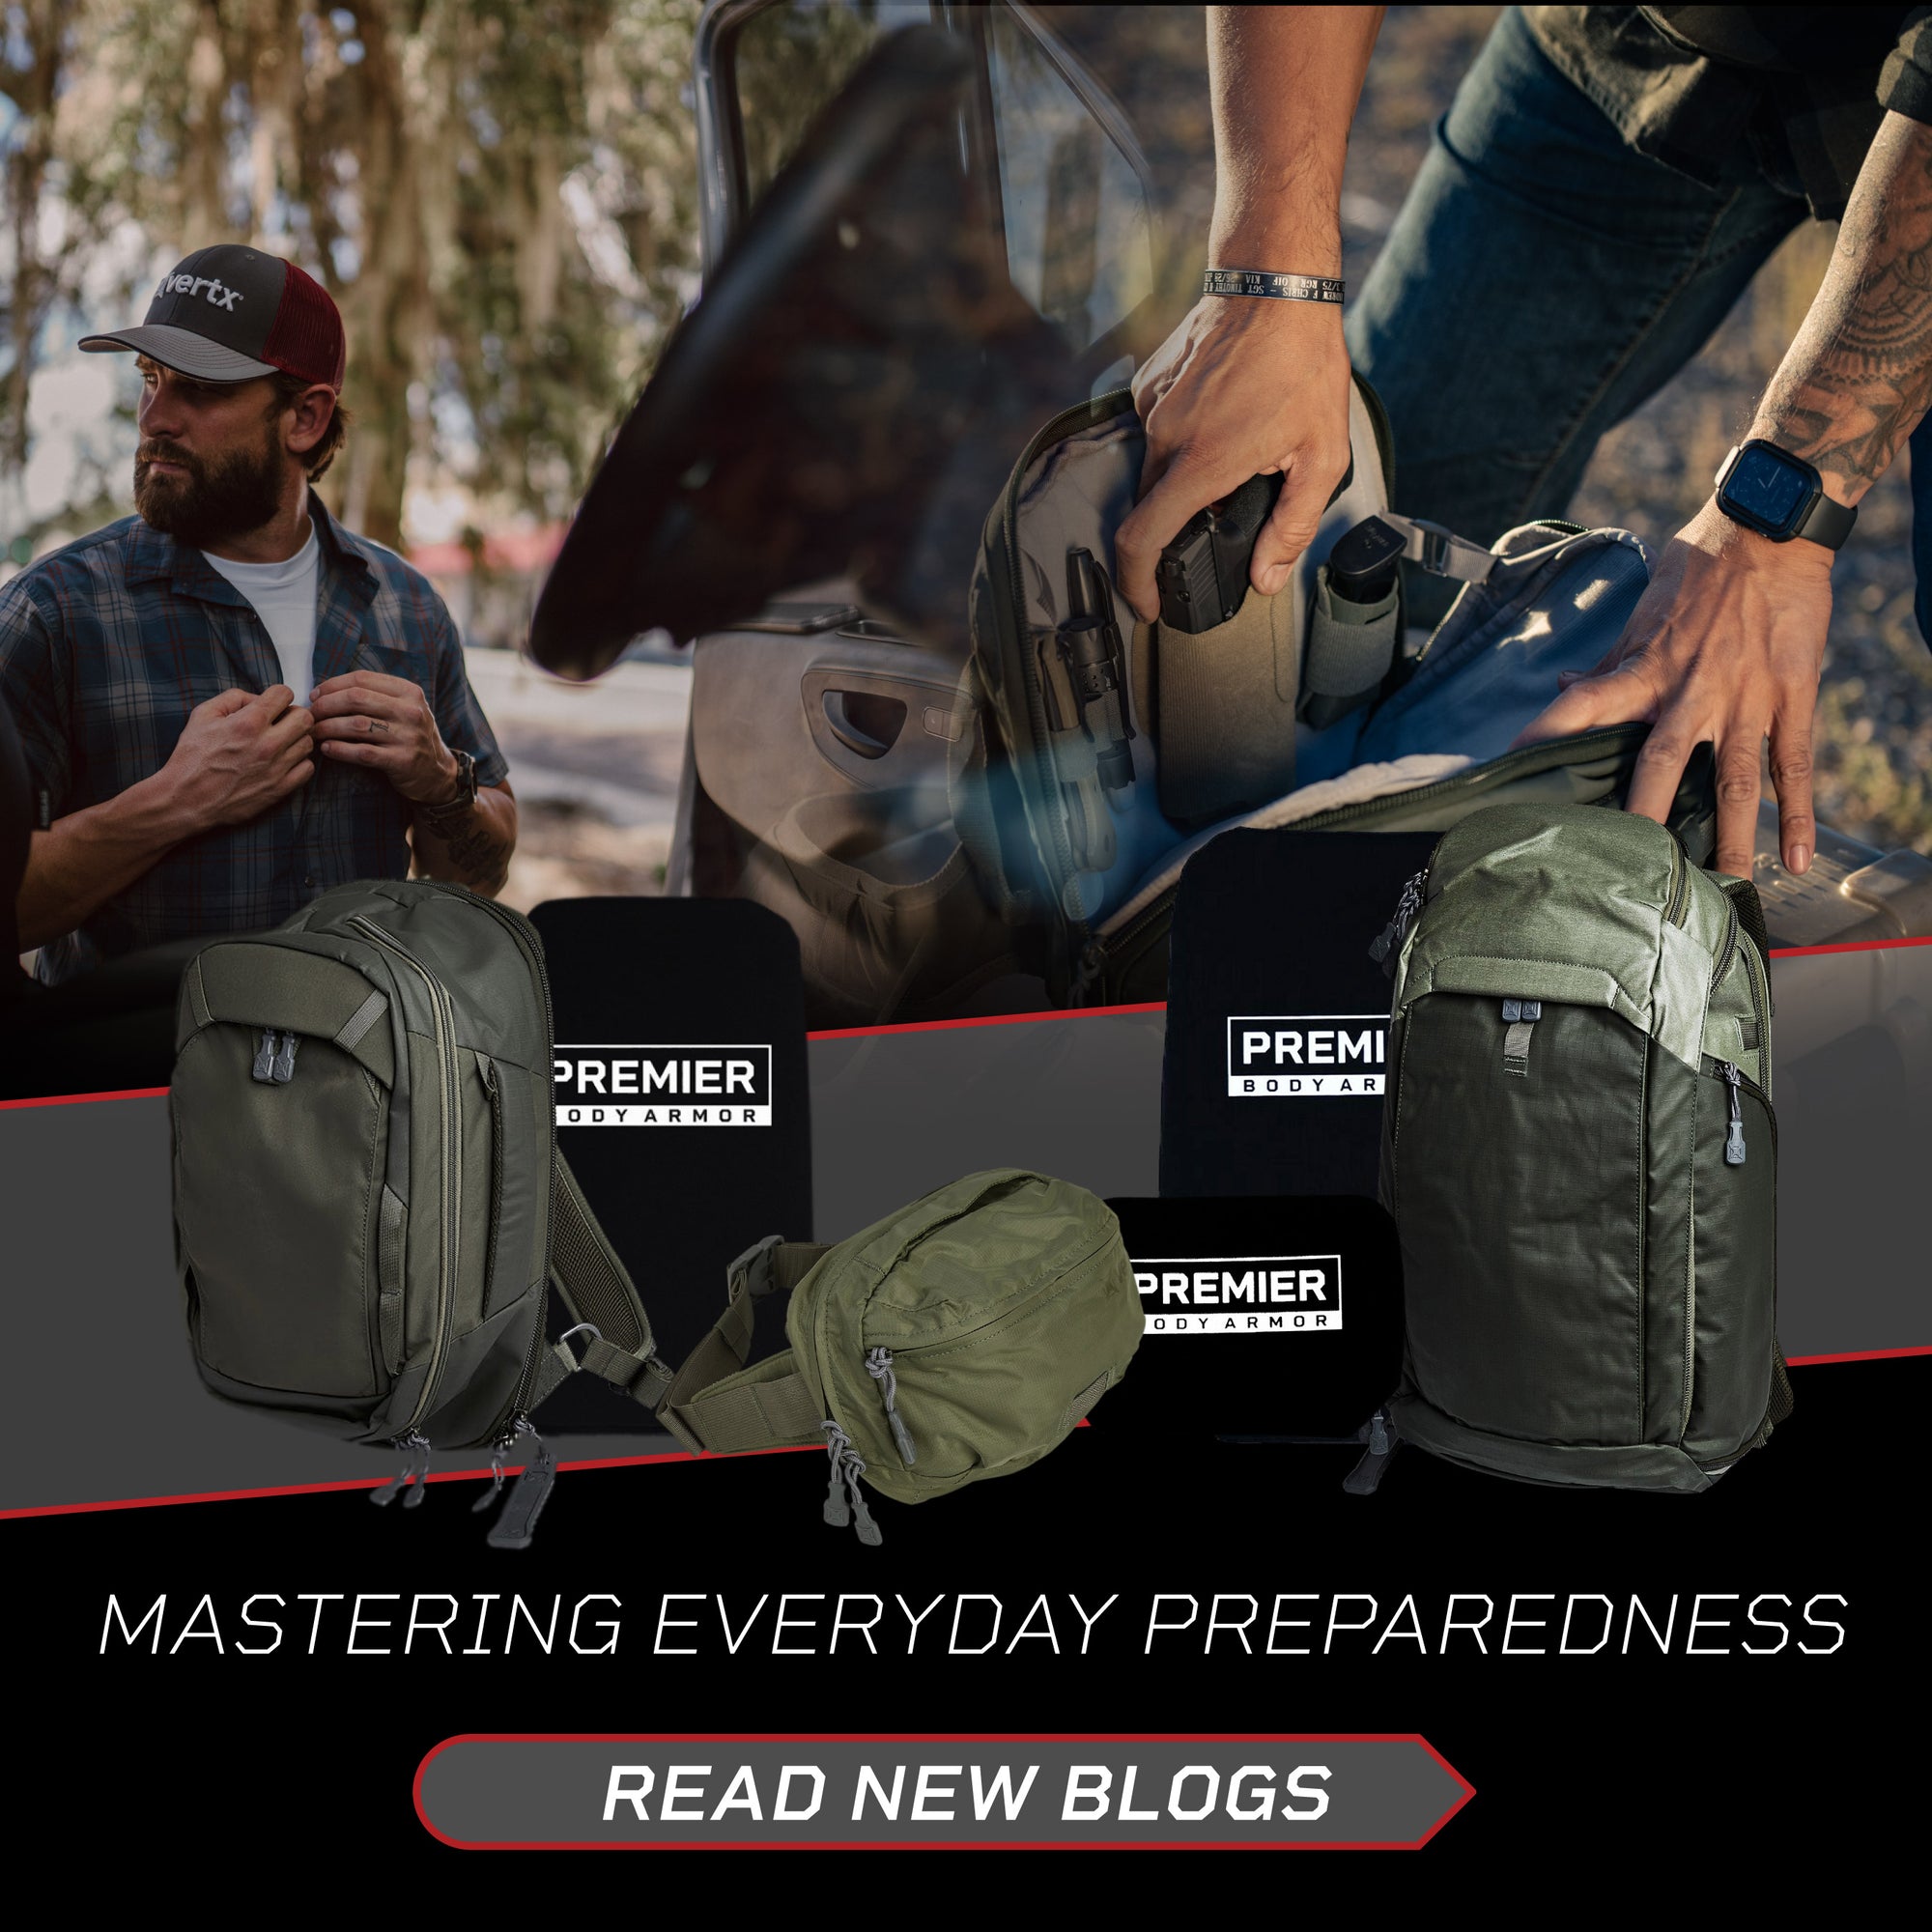 edc bag checklist blog and how to be prepared everyday